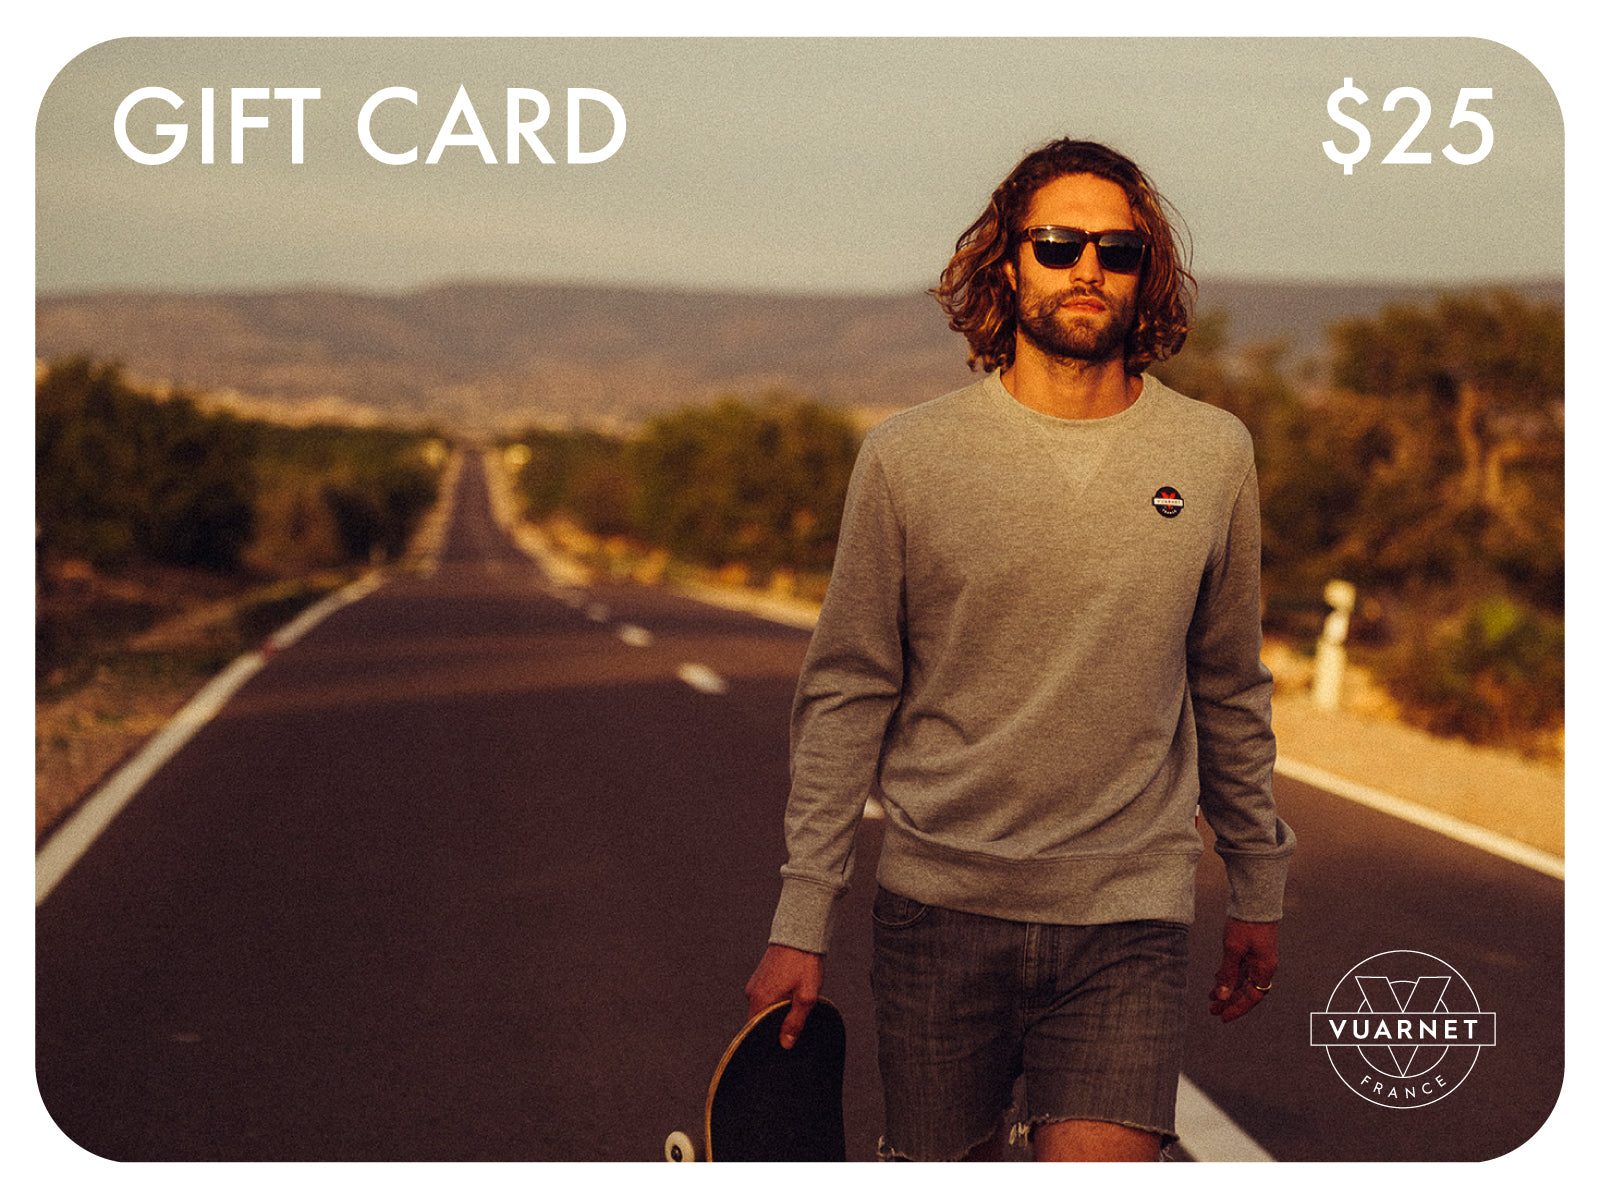 GIFT CARDS FROM $10 TO $200 - Vuarnet Canada